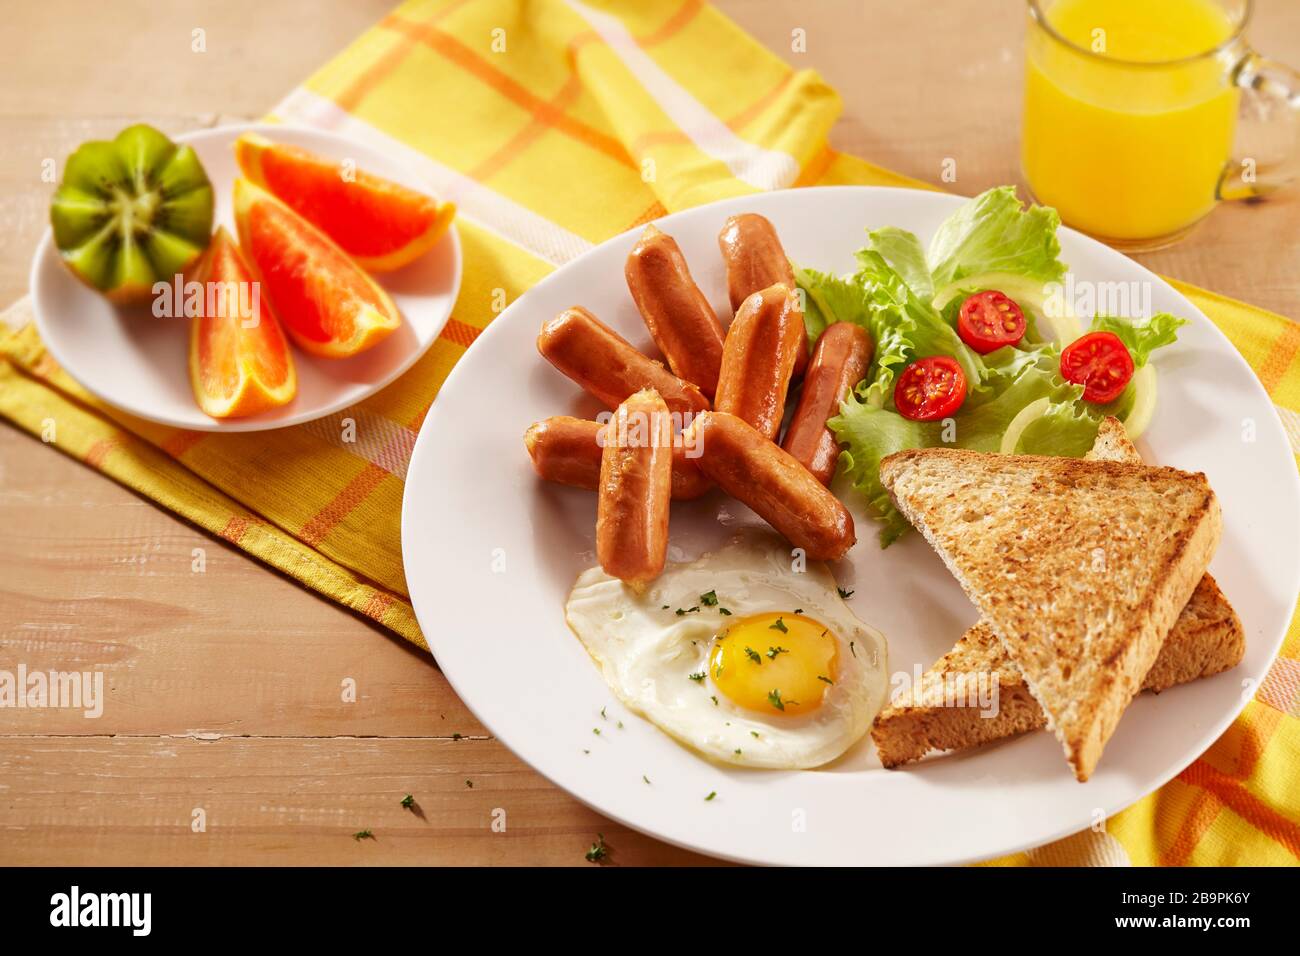 A breakfast plate containing cocktail sausages, toasted bread, fried eggs, salads, fruits and a glass of orange juice Stock Photo